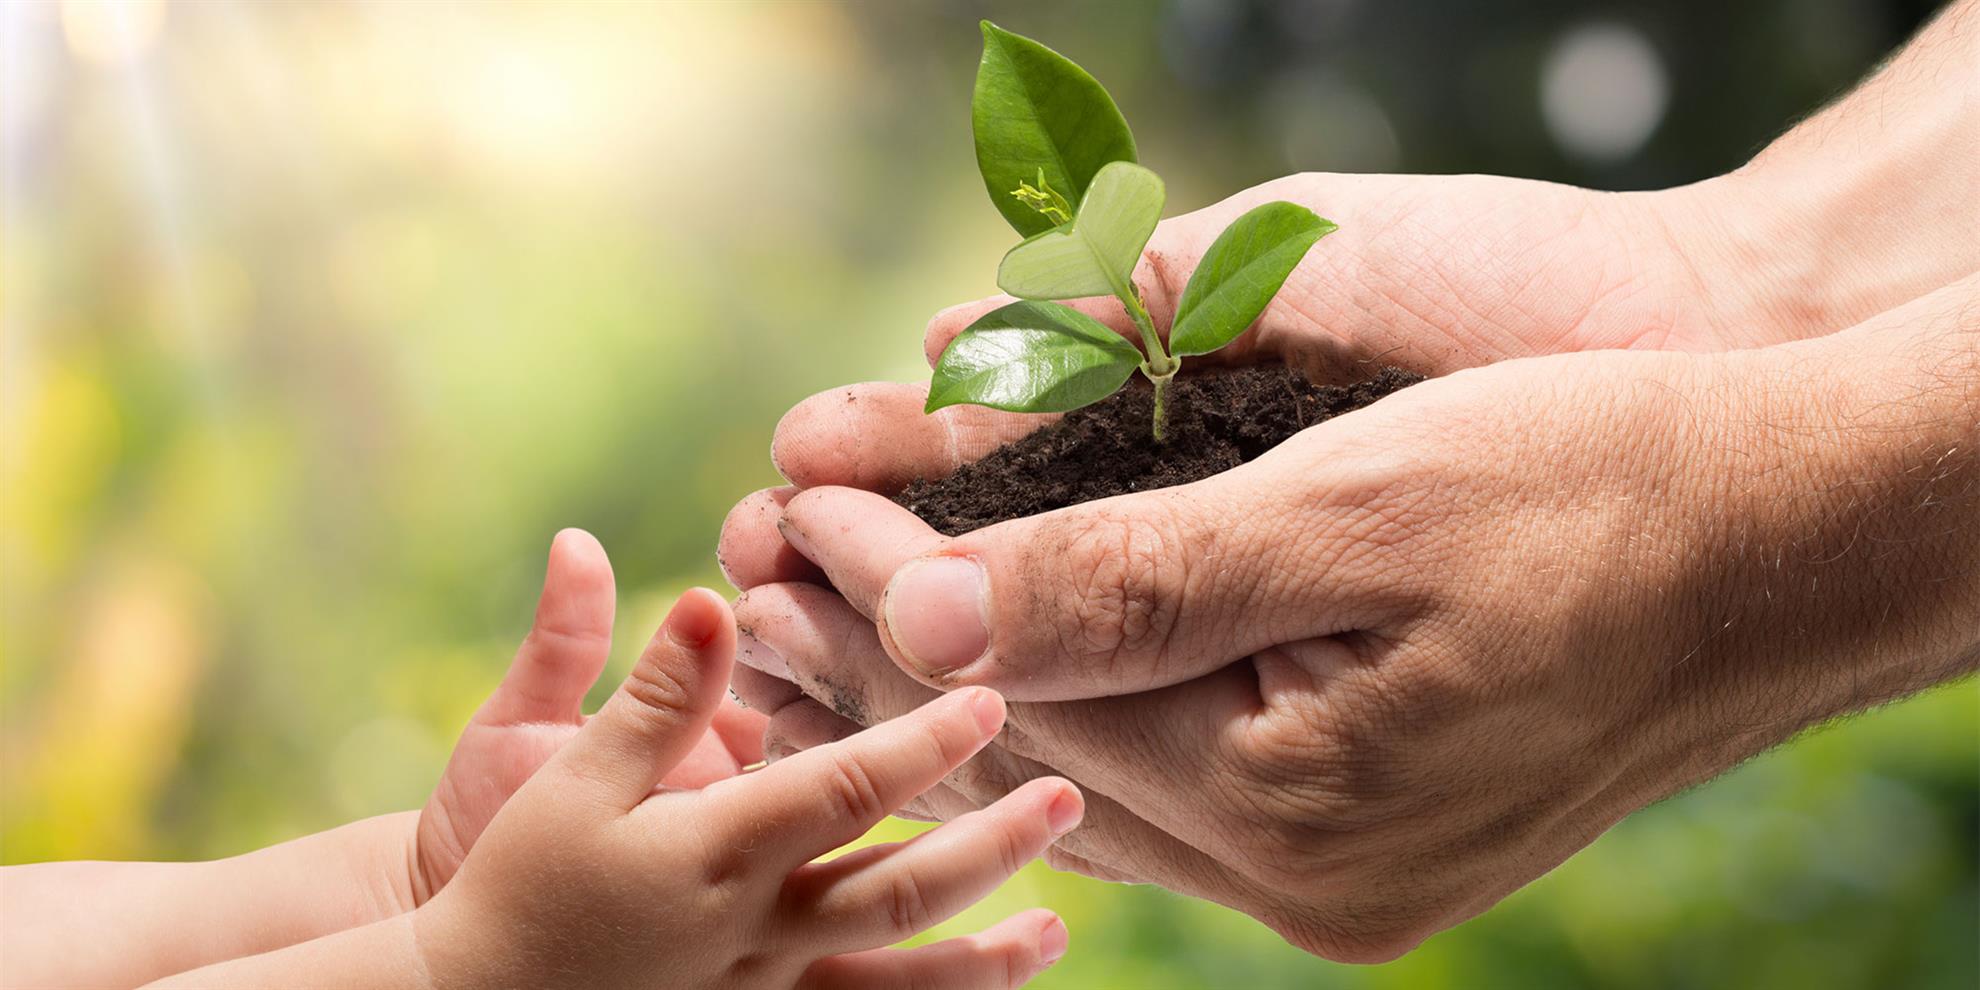 A baby holds a small plant in the hands of an adult, symbolizing growth and nurturing.